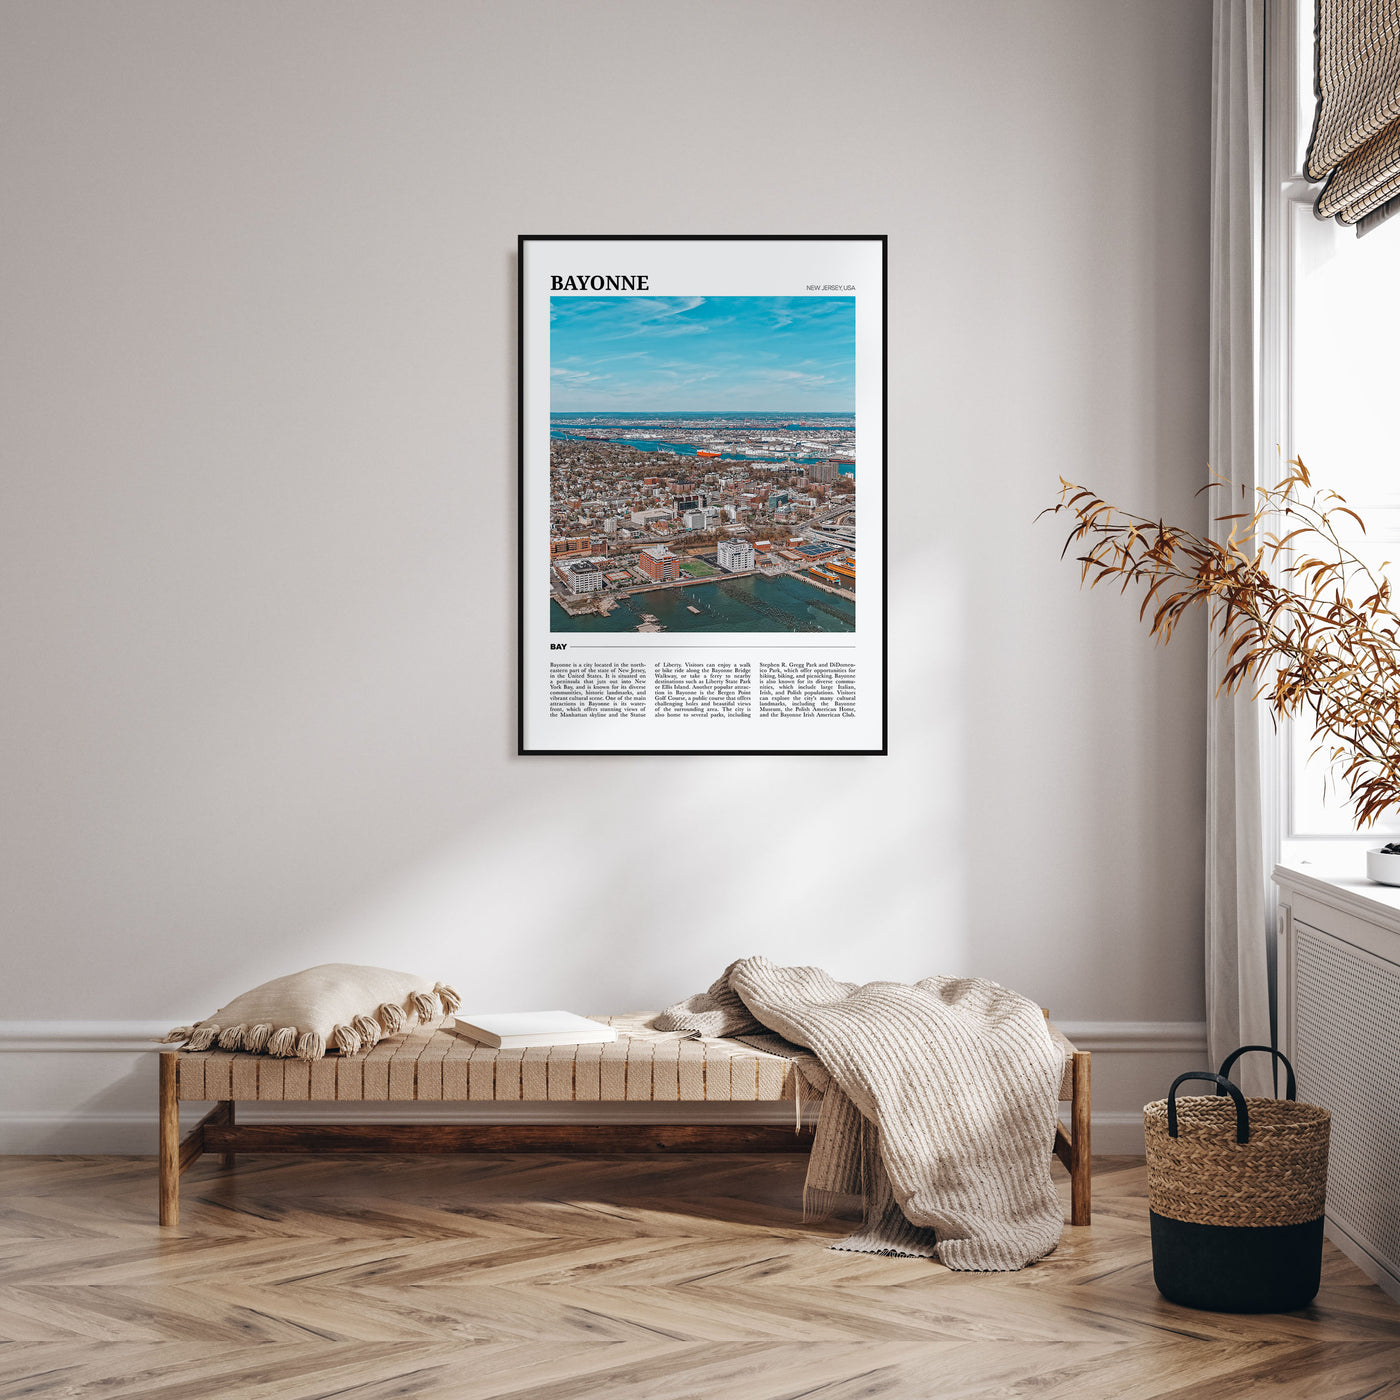 Bayonne, New Jersey Travel Color Poster